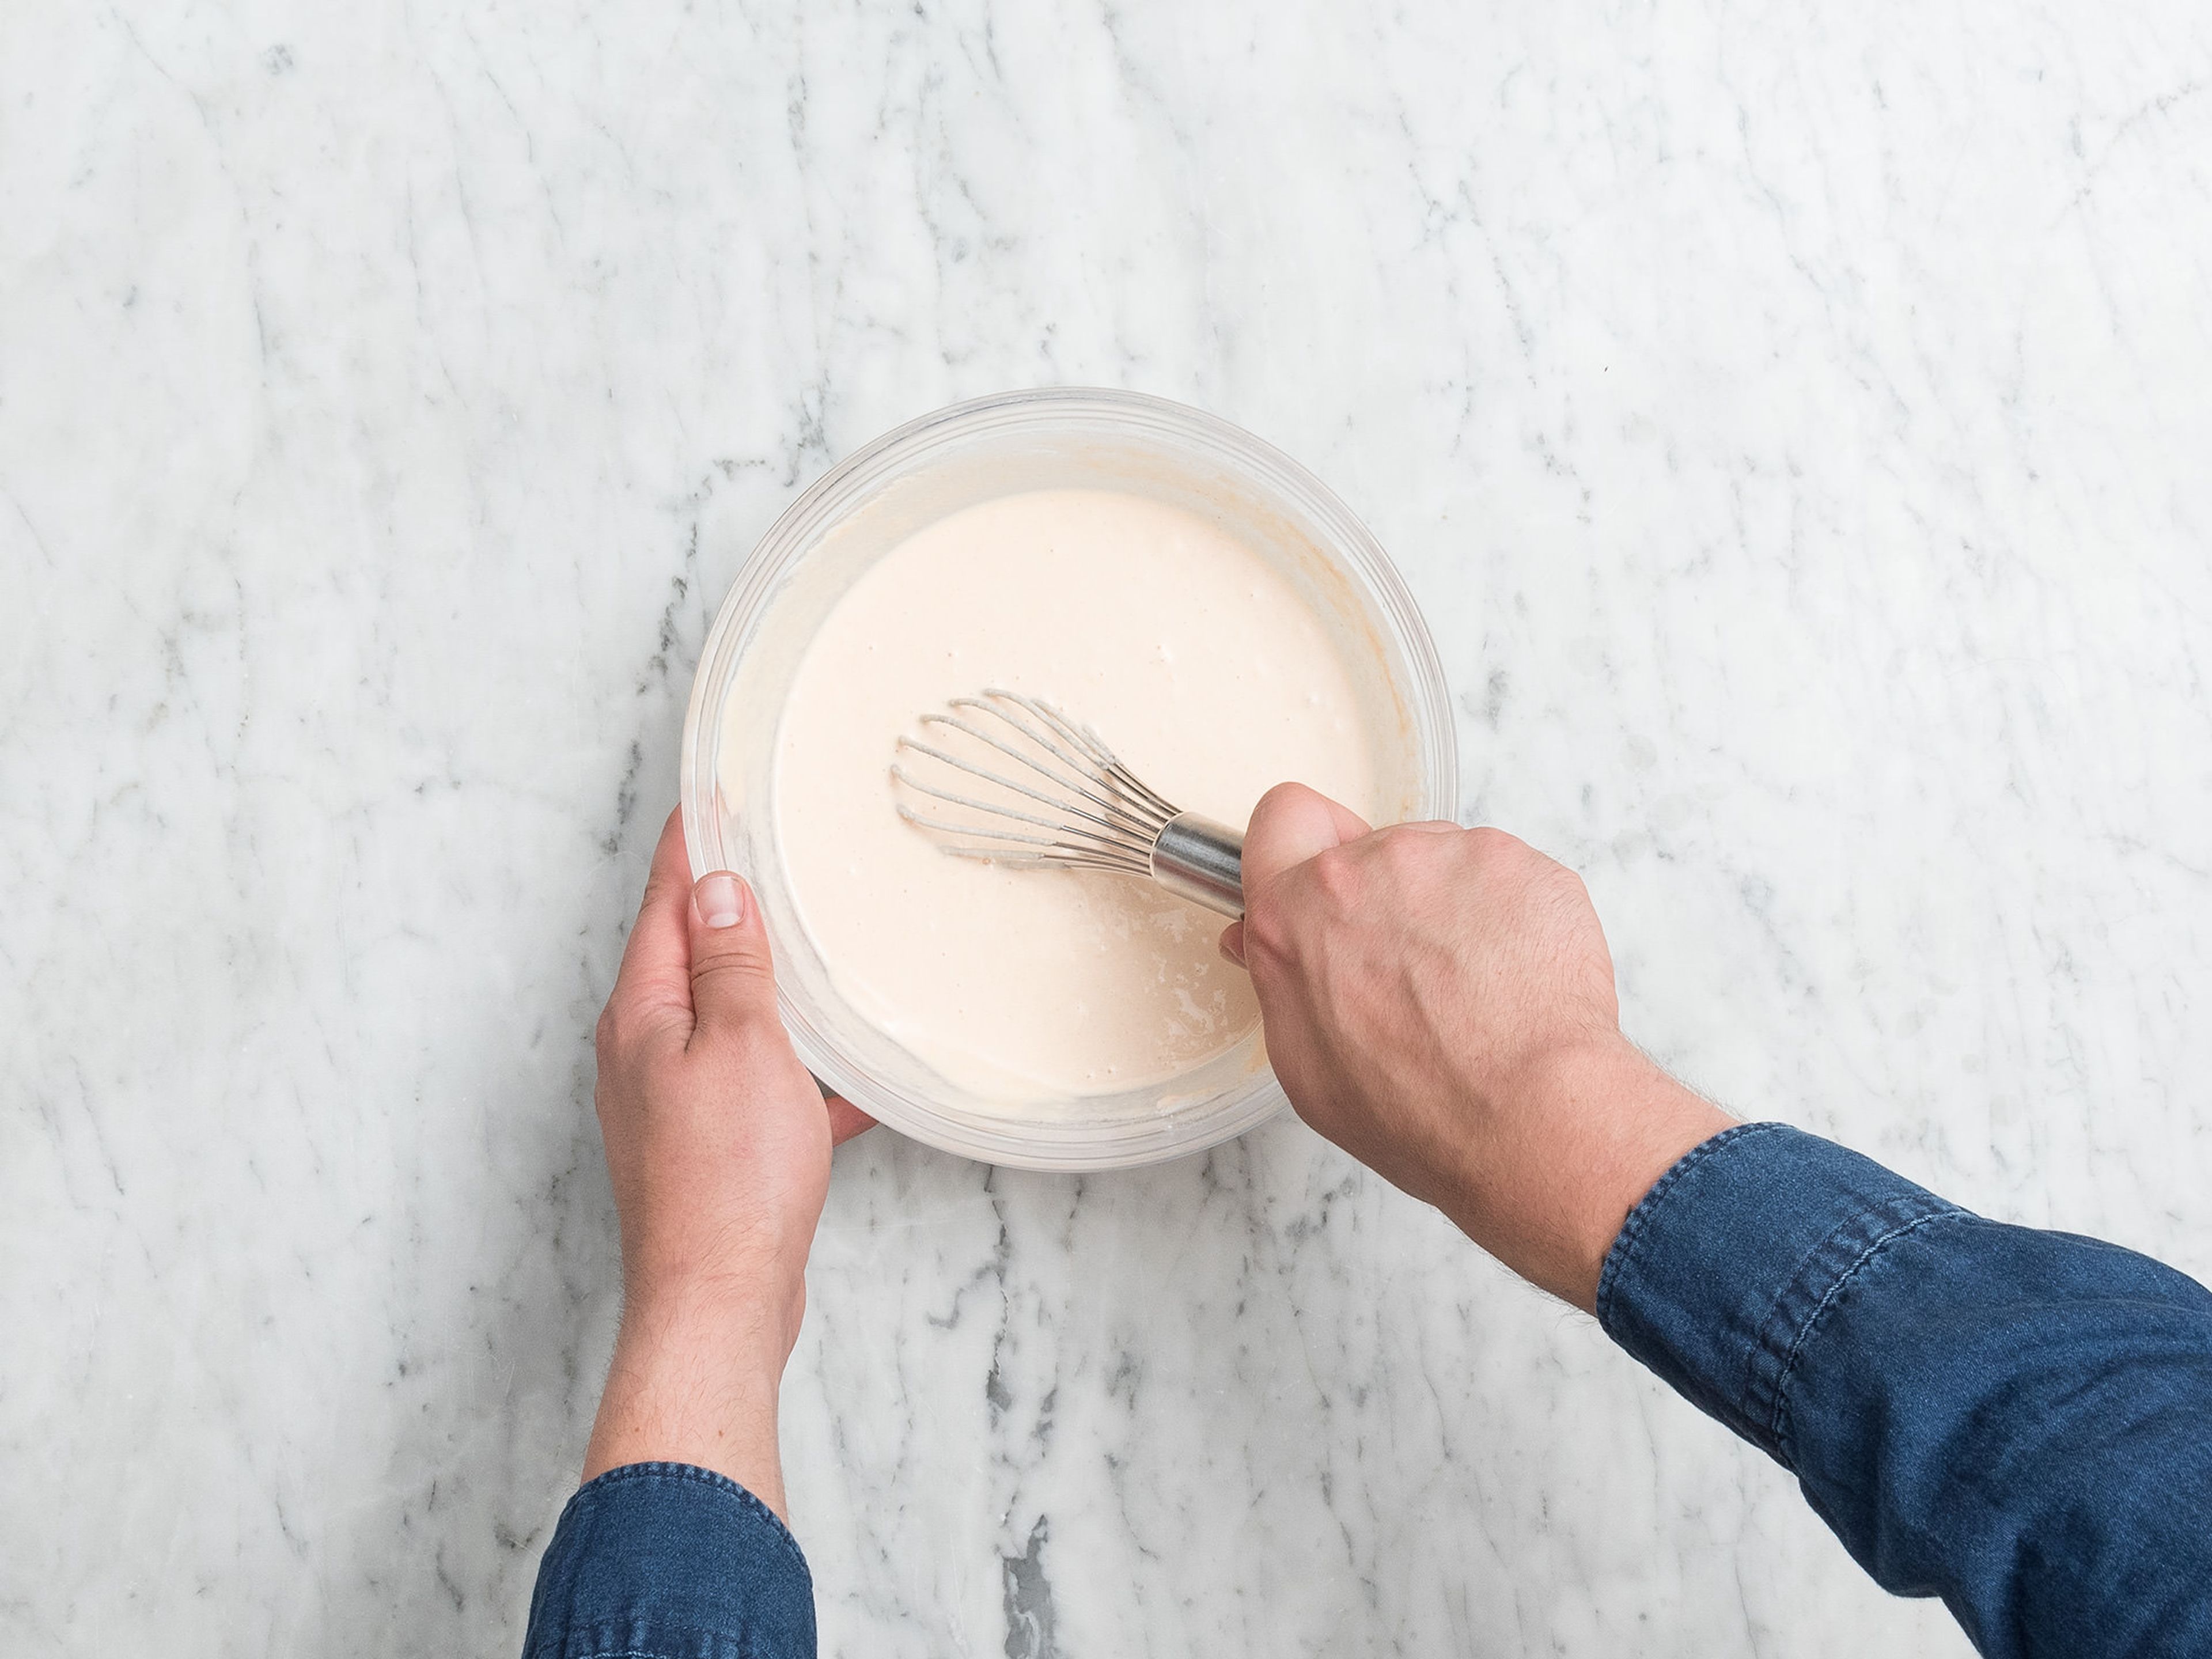 Add rice flour, lentil flour, baking soda, and salt to a bowl. Add part of the yogurt and water and whisk until a smooth batter forms. Cover with a kitchen towel and allow to rest in the fridge for 1 – 2 hrs.